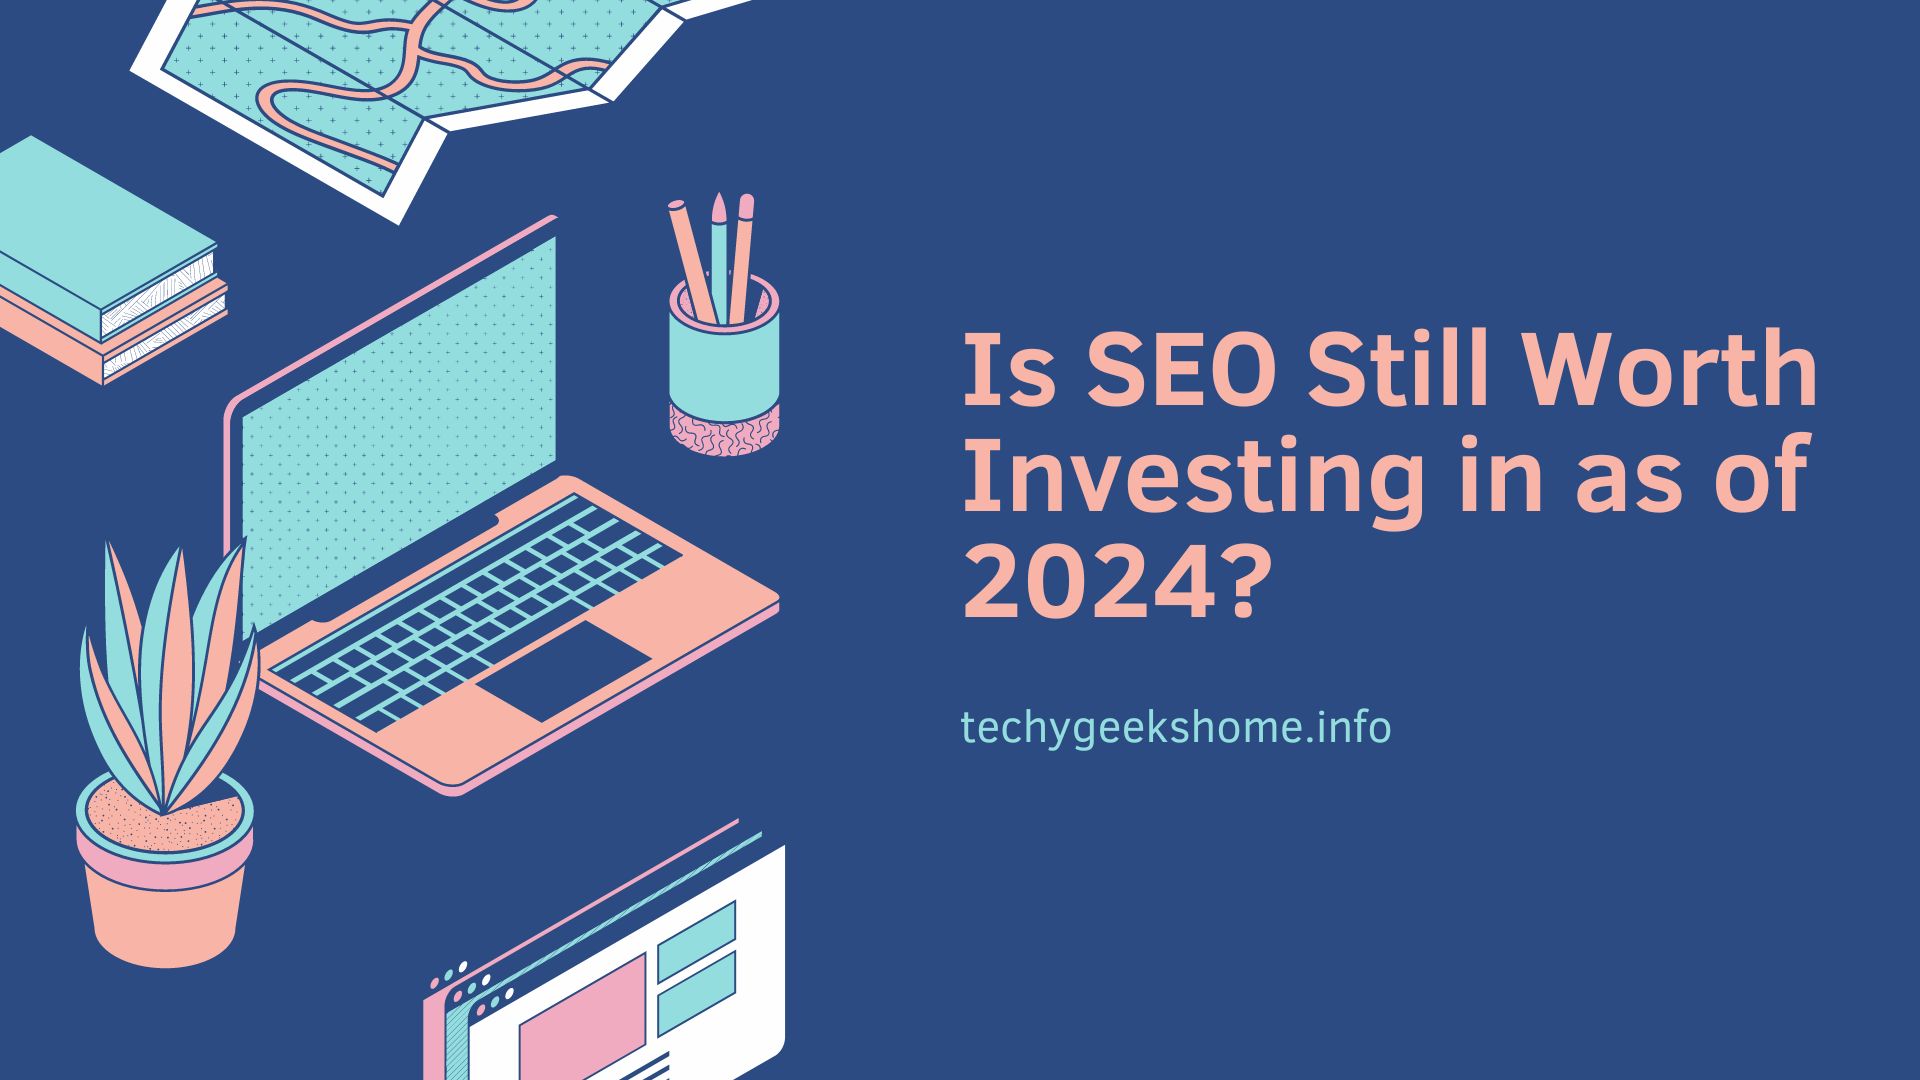 Is SEO Still Worth Investing in as of 2024?